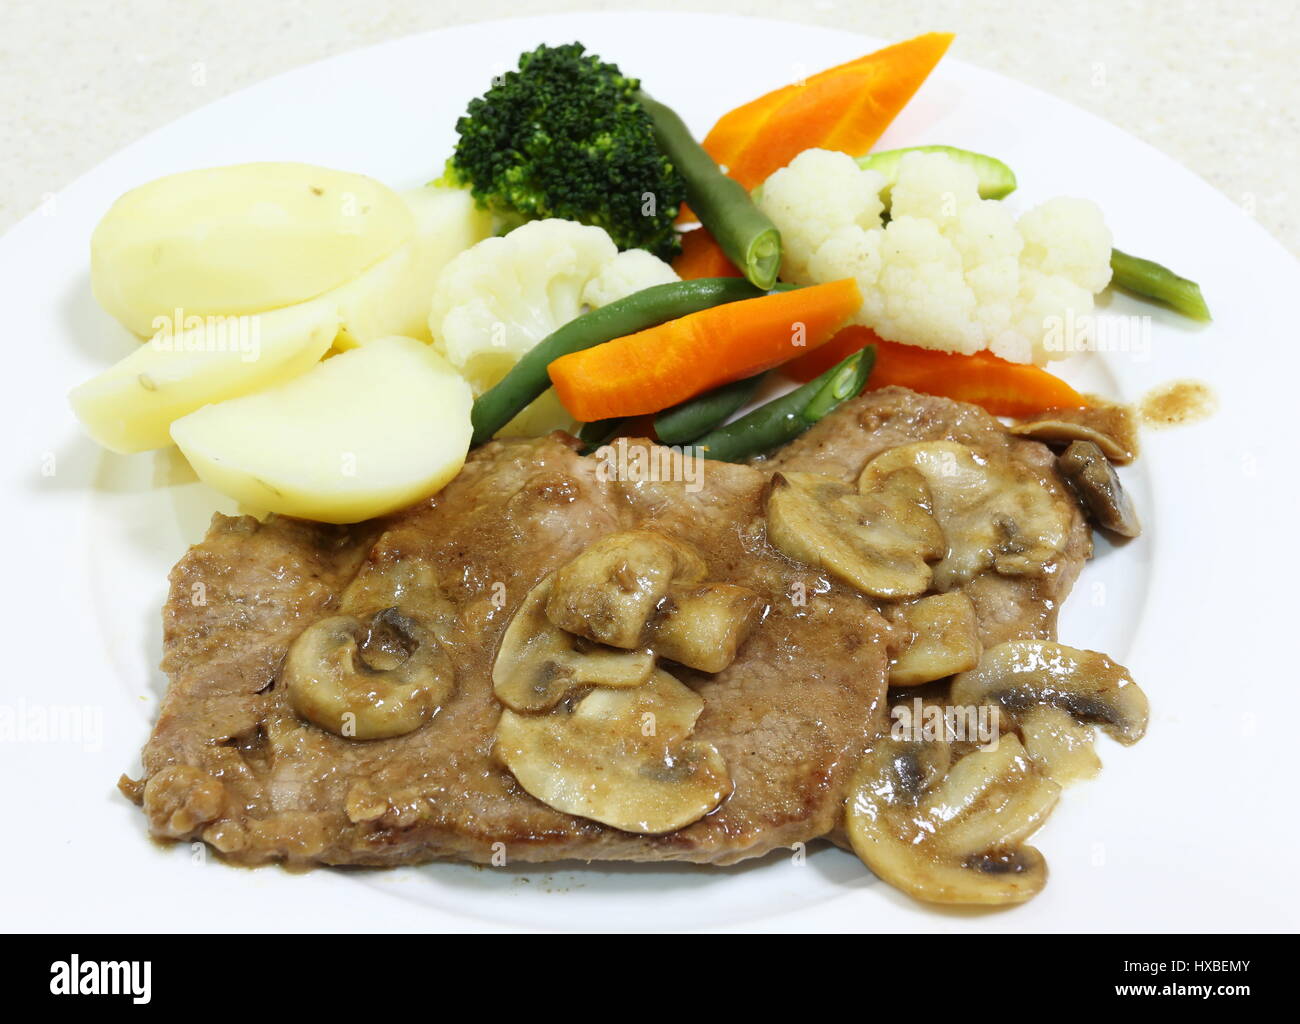 Braised beef and mushrooms in gravy with a steamed vegetable side Stock Photo